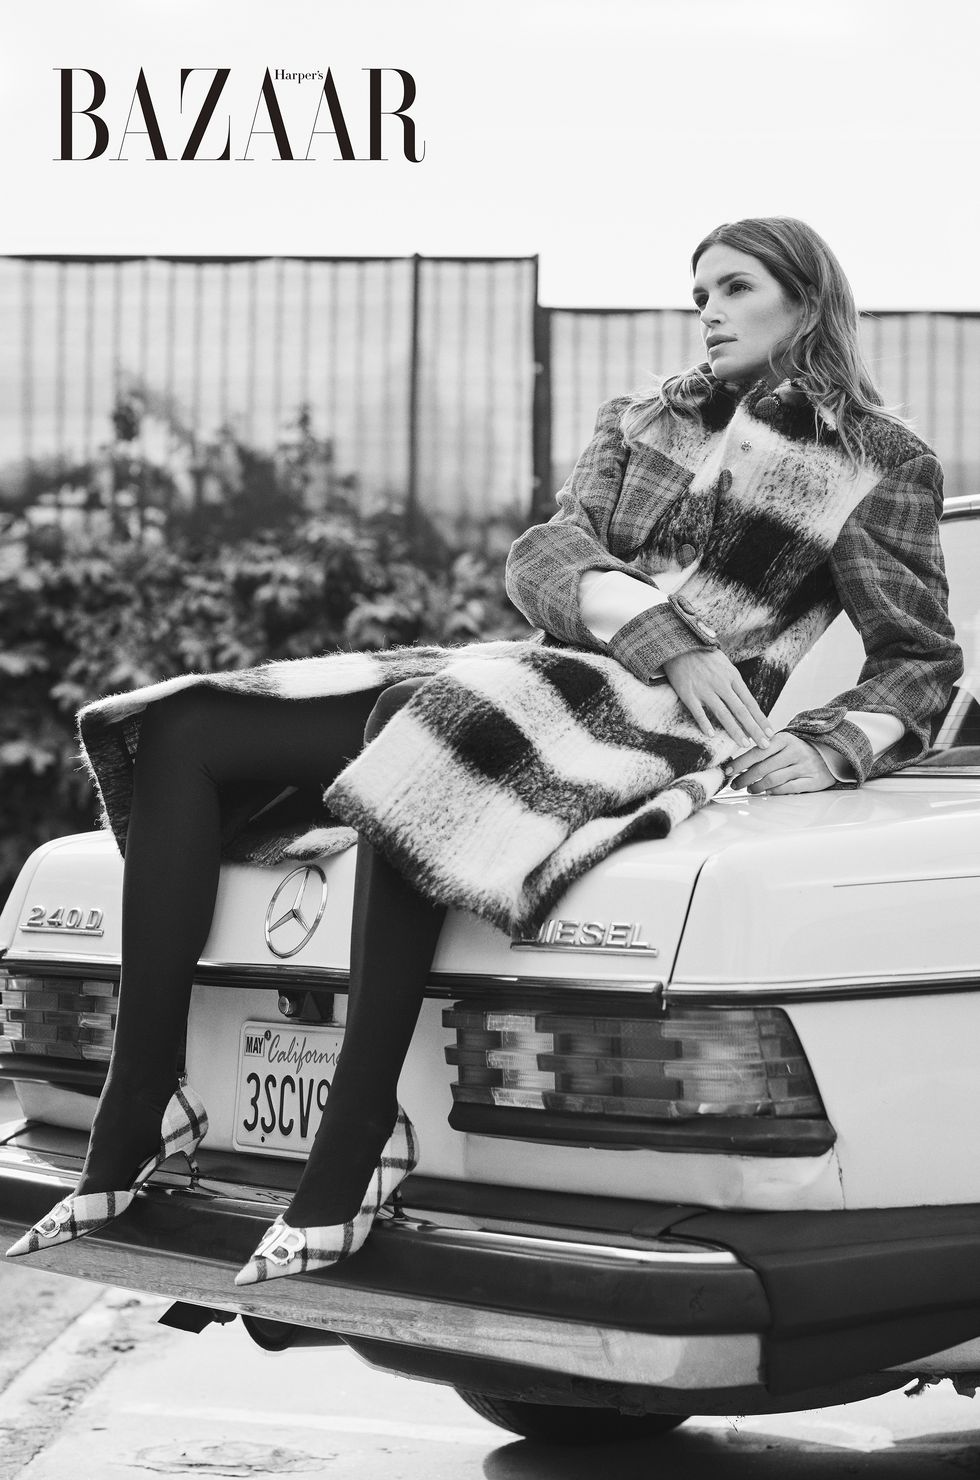 Vehicle, Car, Photo shoot, Photography, Footwear, Design, Black-and-white, Retro style, Classic, Advertising, 